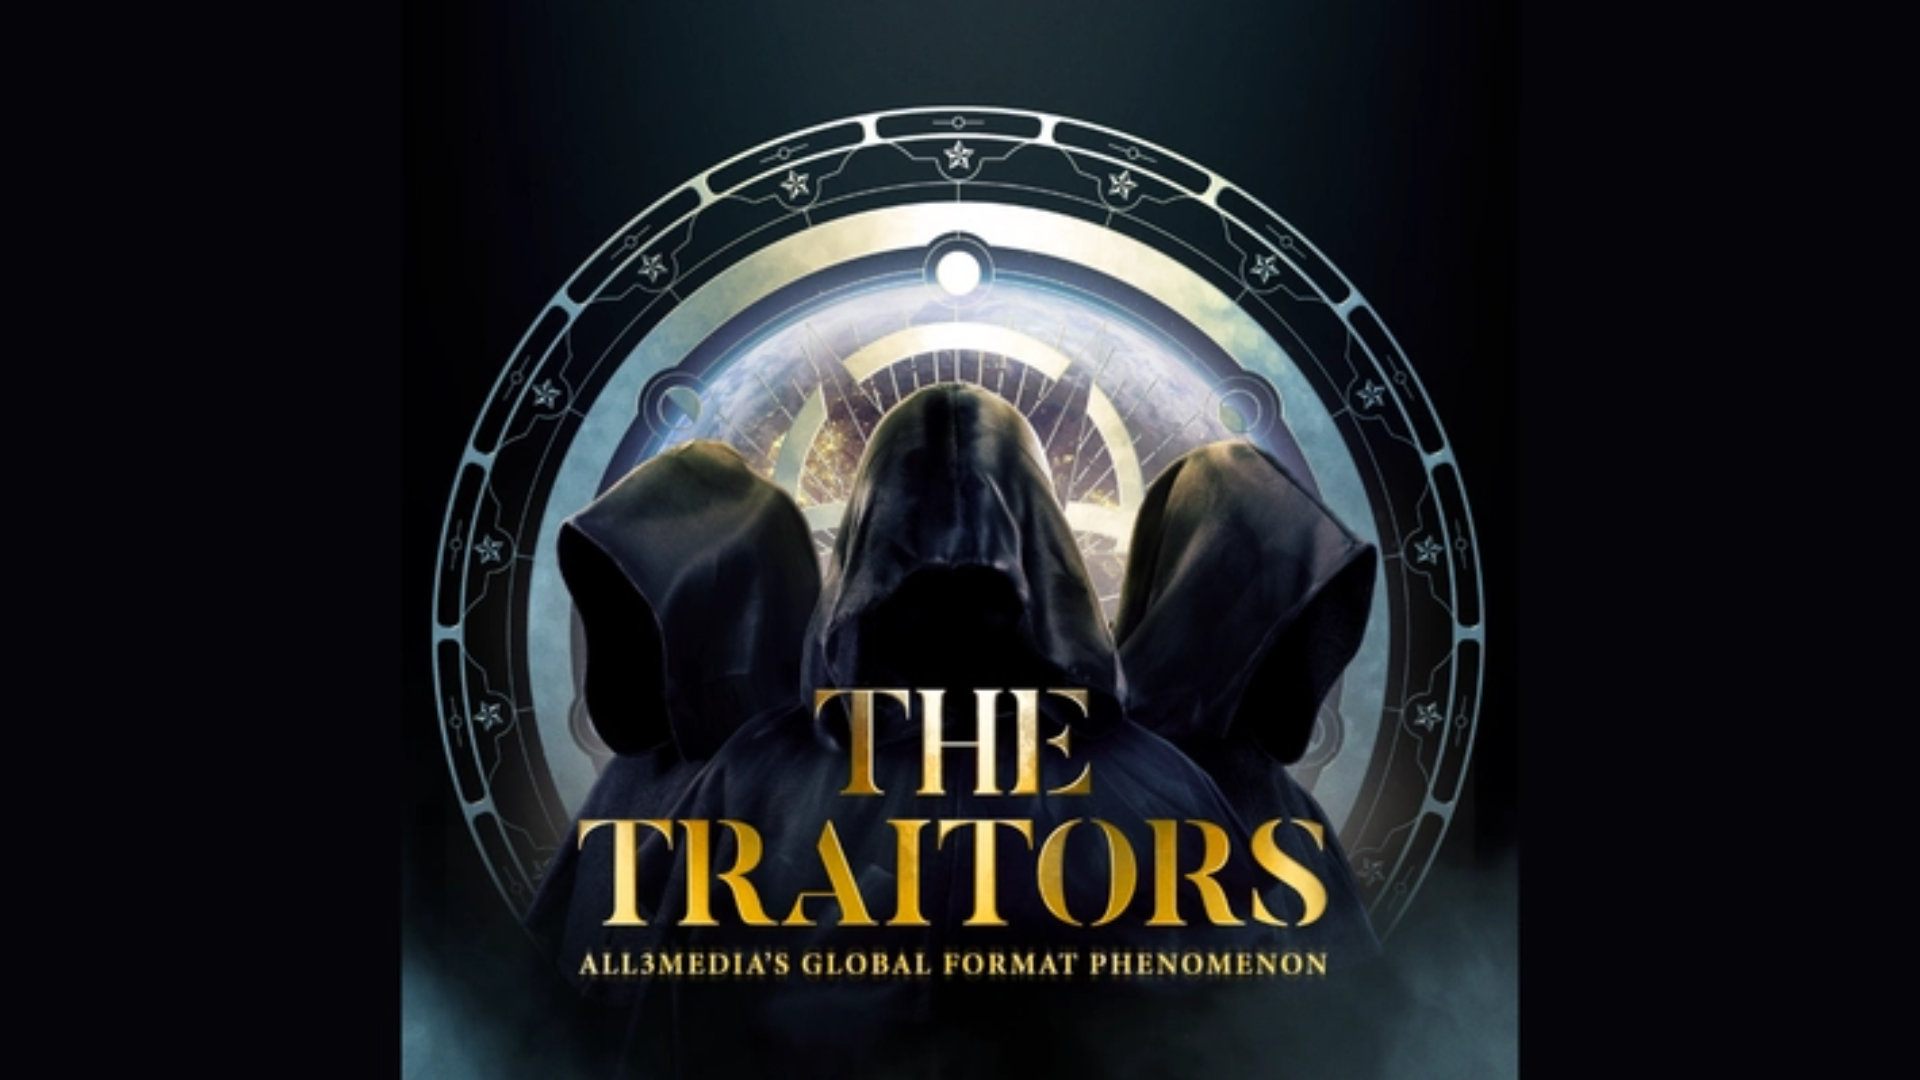 The Traitors unveils brand new 'immersive experience' as fans await series  2